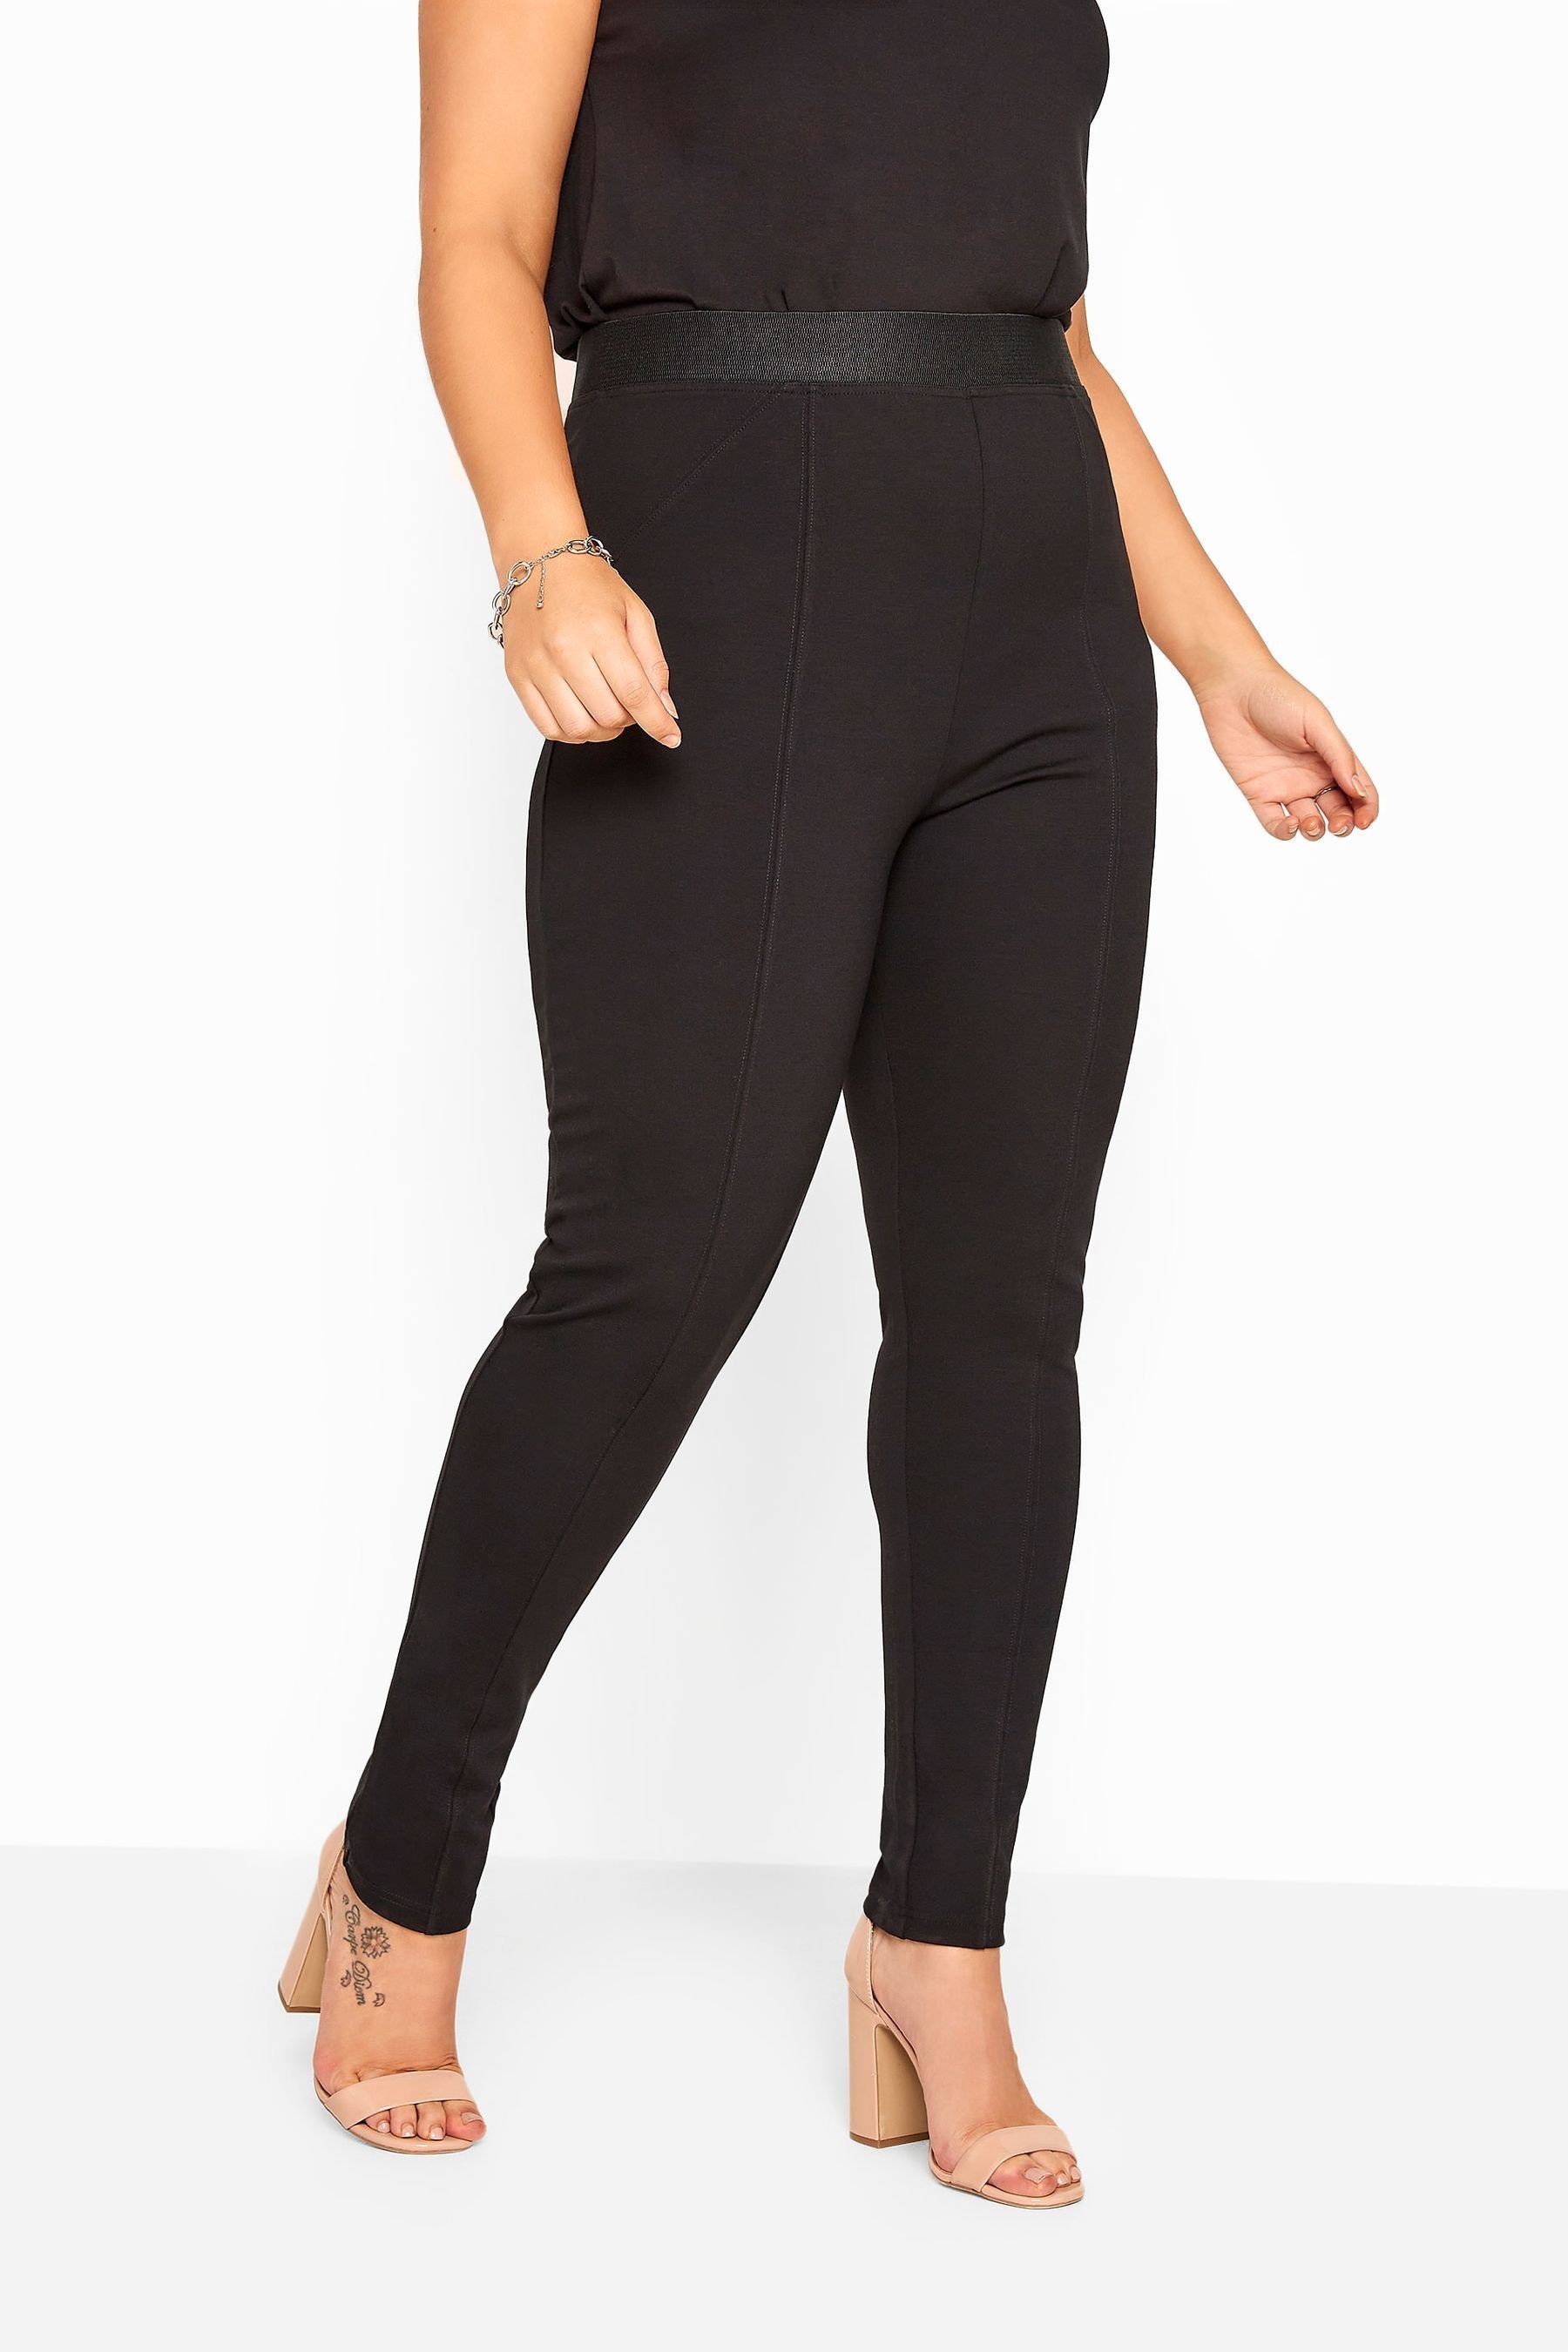 Buy Yours Curve Ponte Stretch Trouser from the Next UK online shop